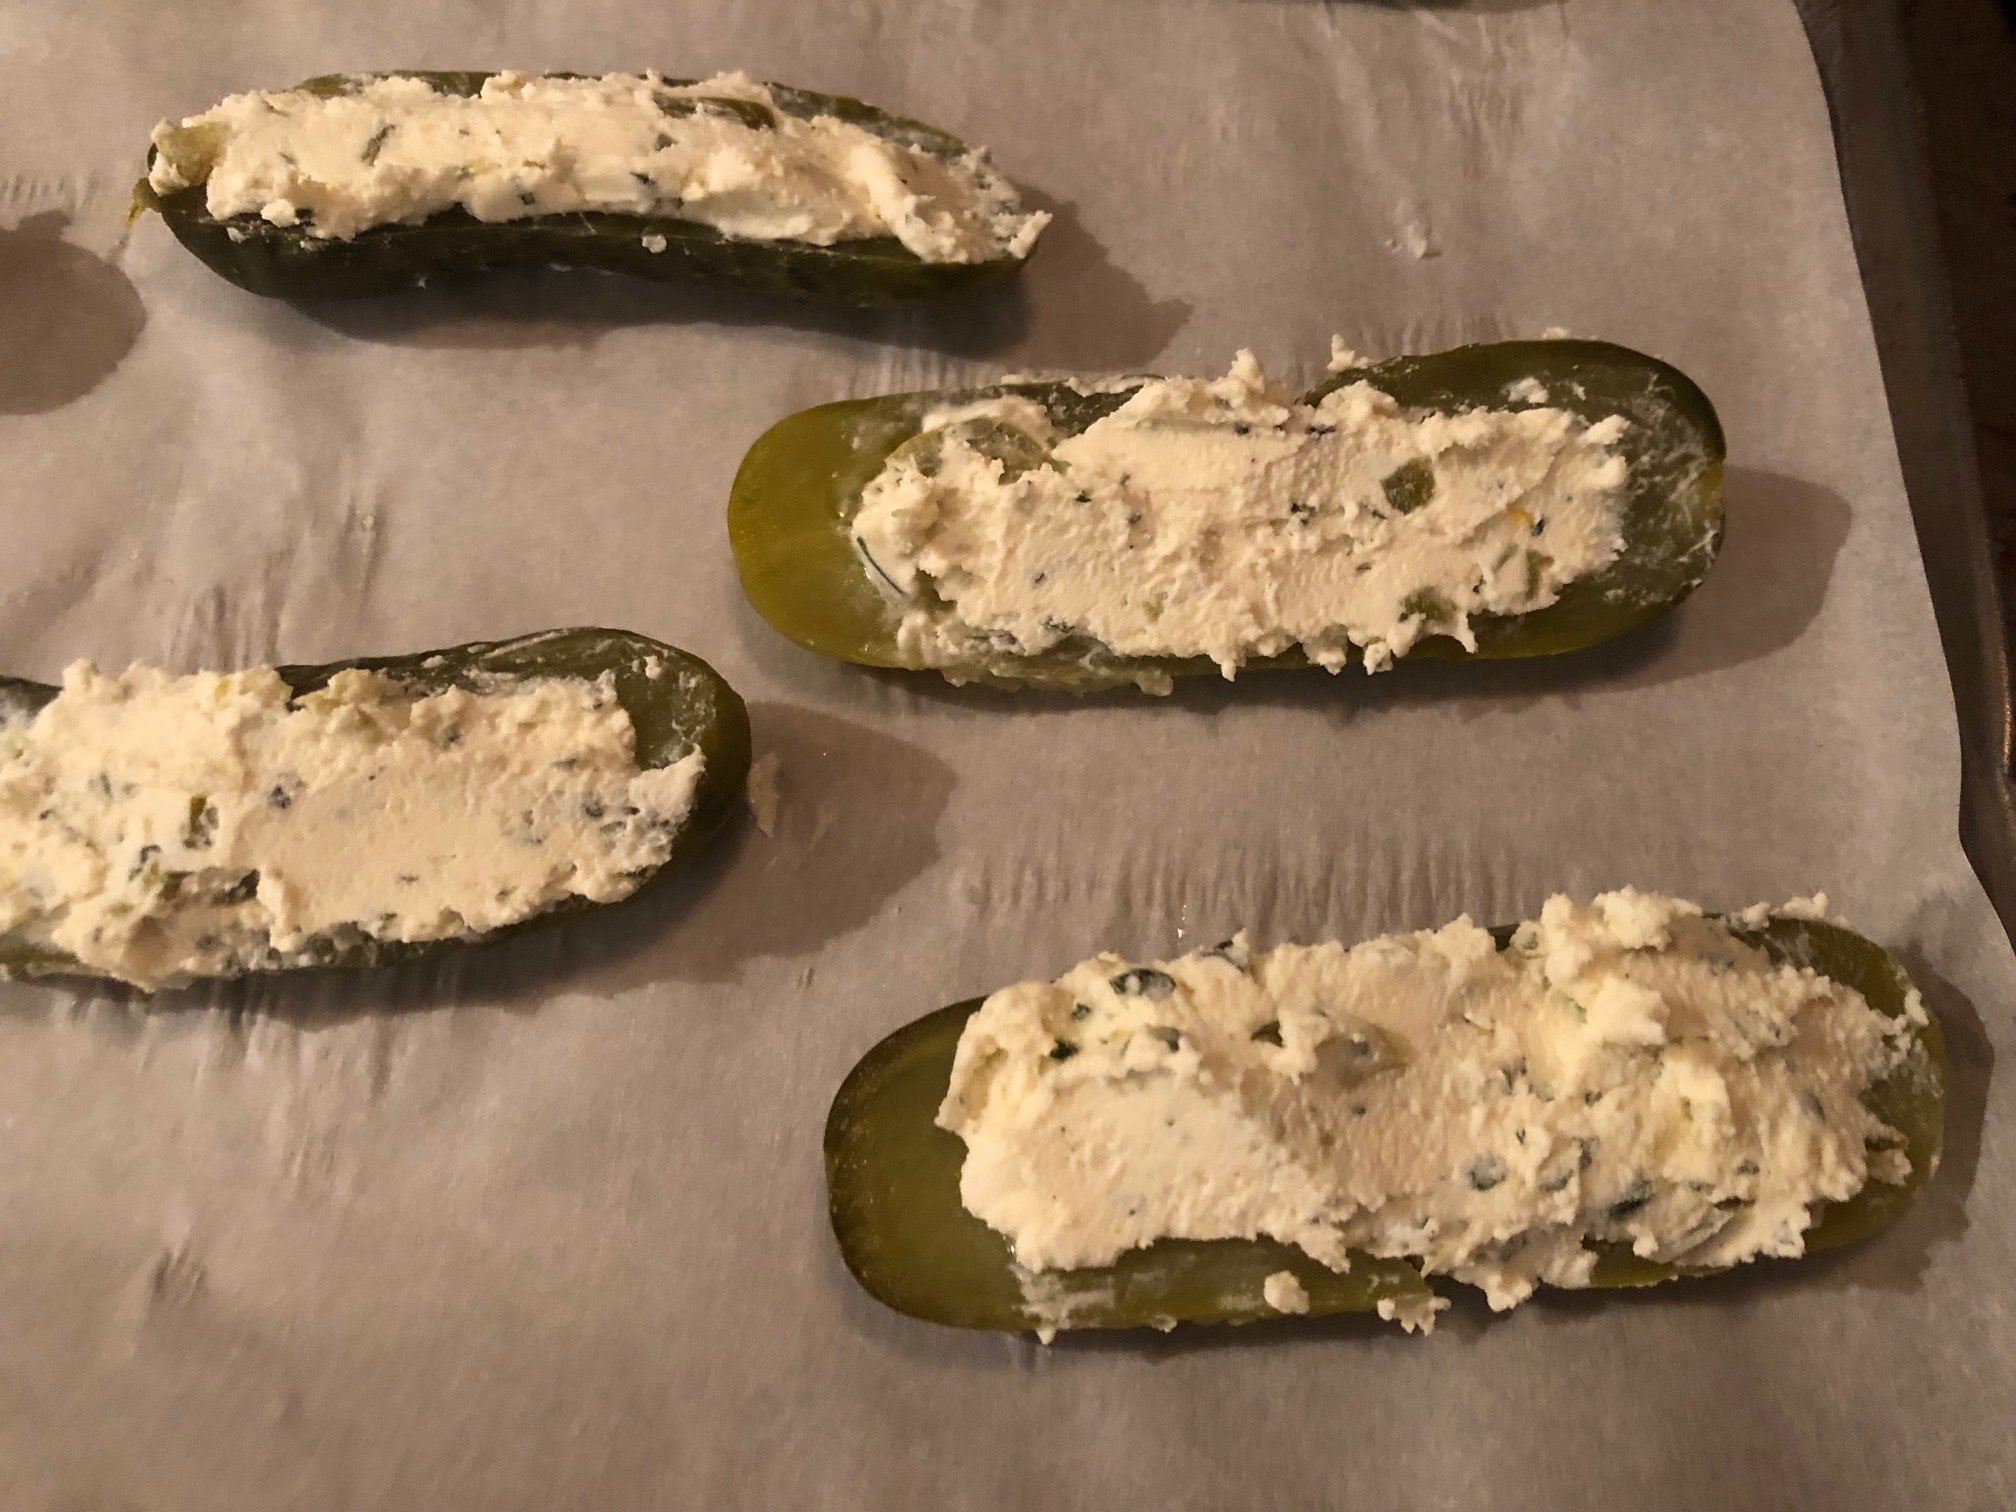 Pickles stuffed with Boursin Cheese mixture and smoothed